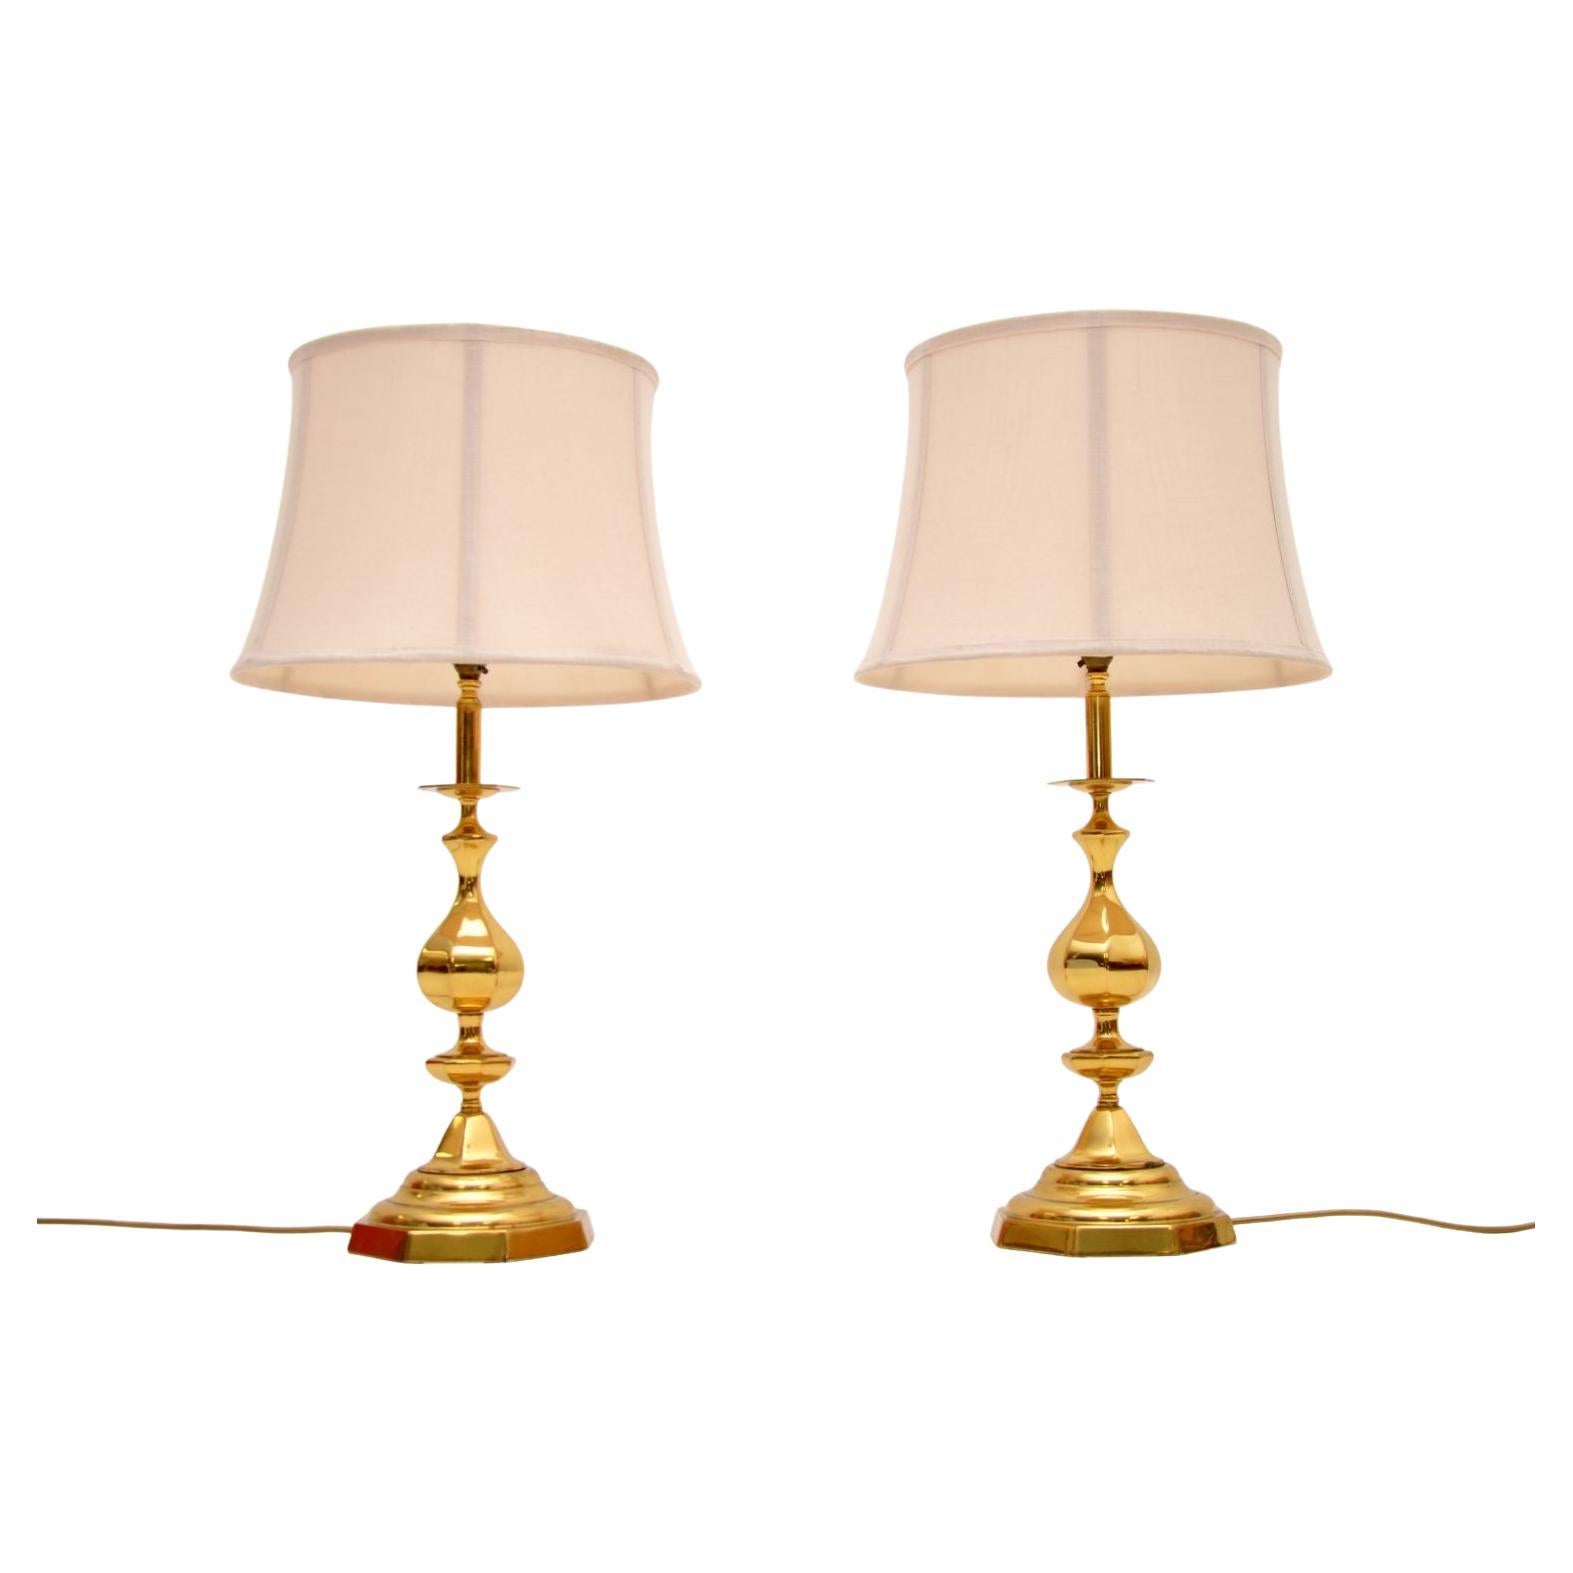 Pair of Vintage Brass Table Lamps